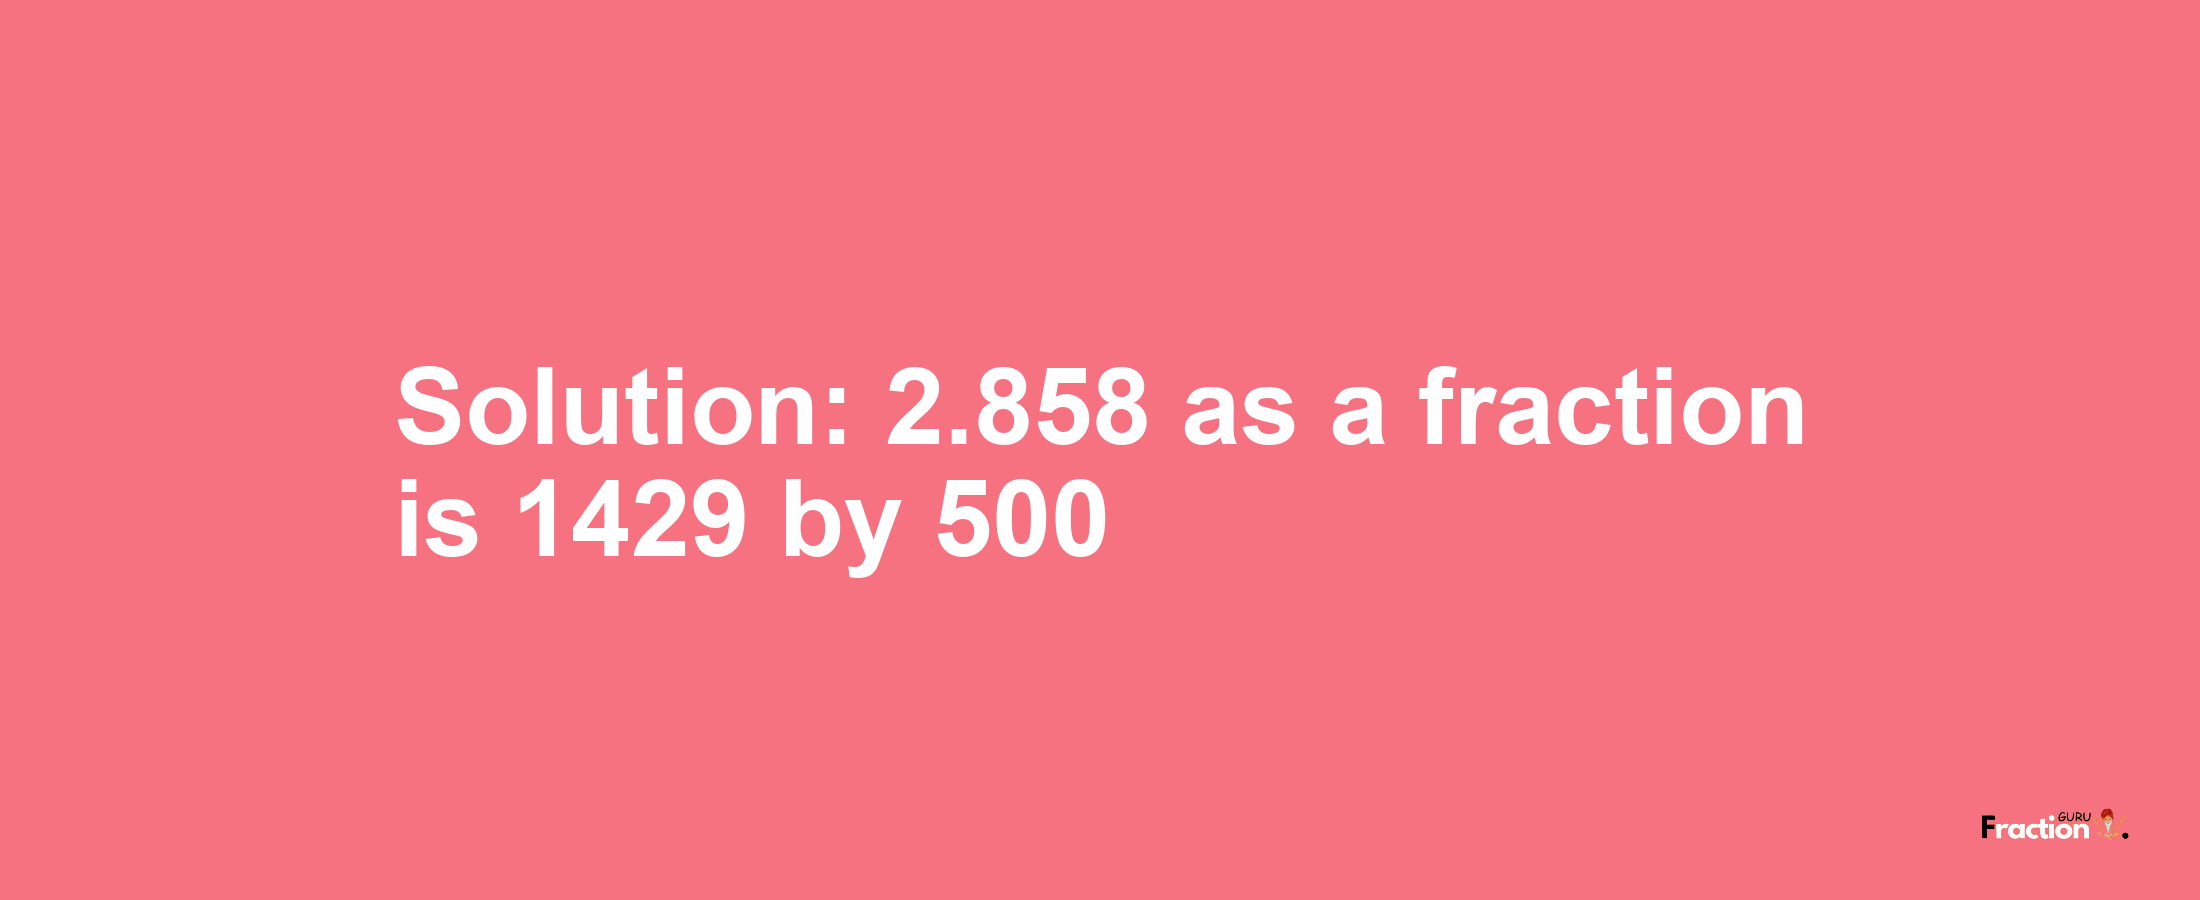 Solution:2.858 as a fraction is 1429/500